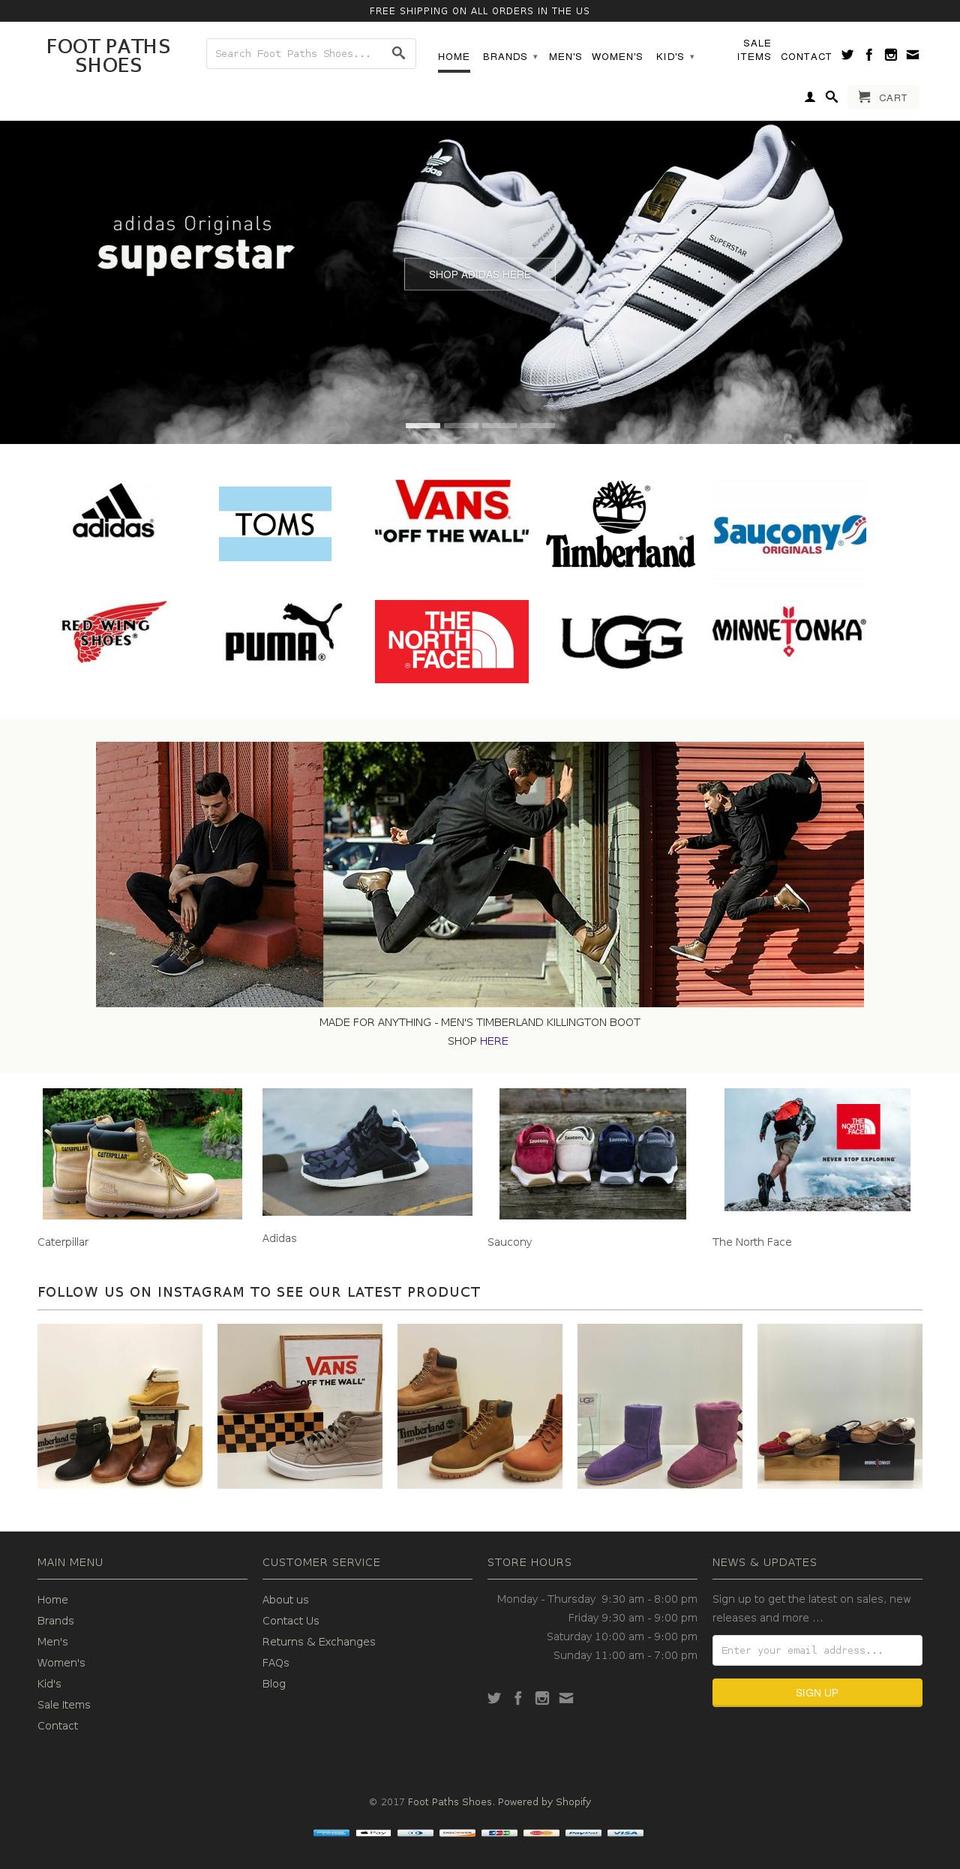 boundless Shopify theme site example footpathsshoes.com